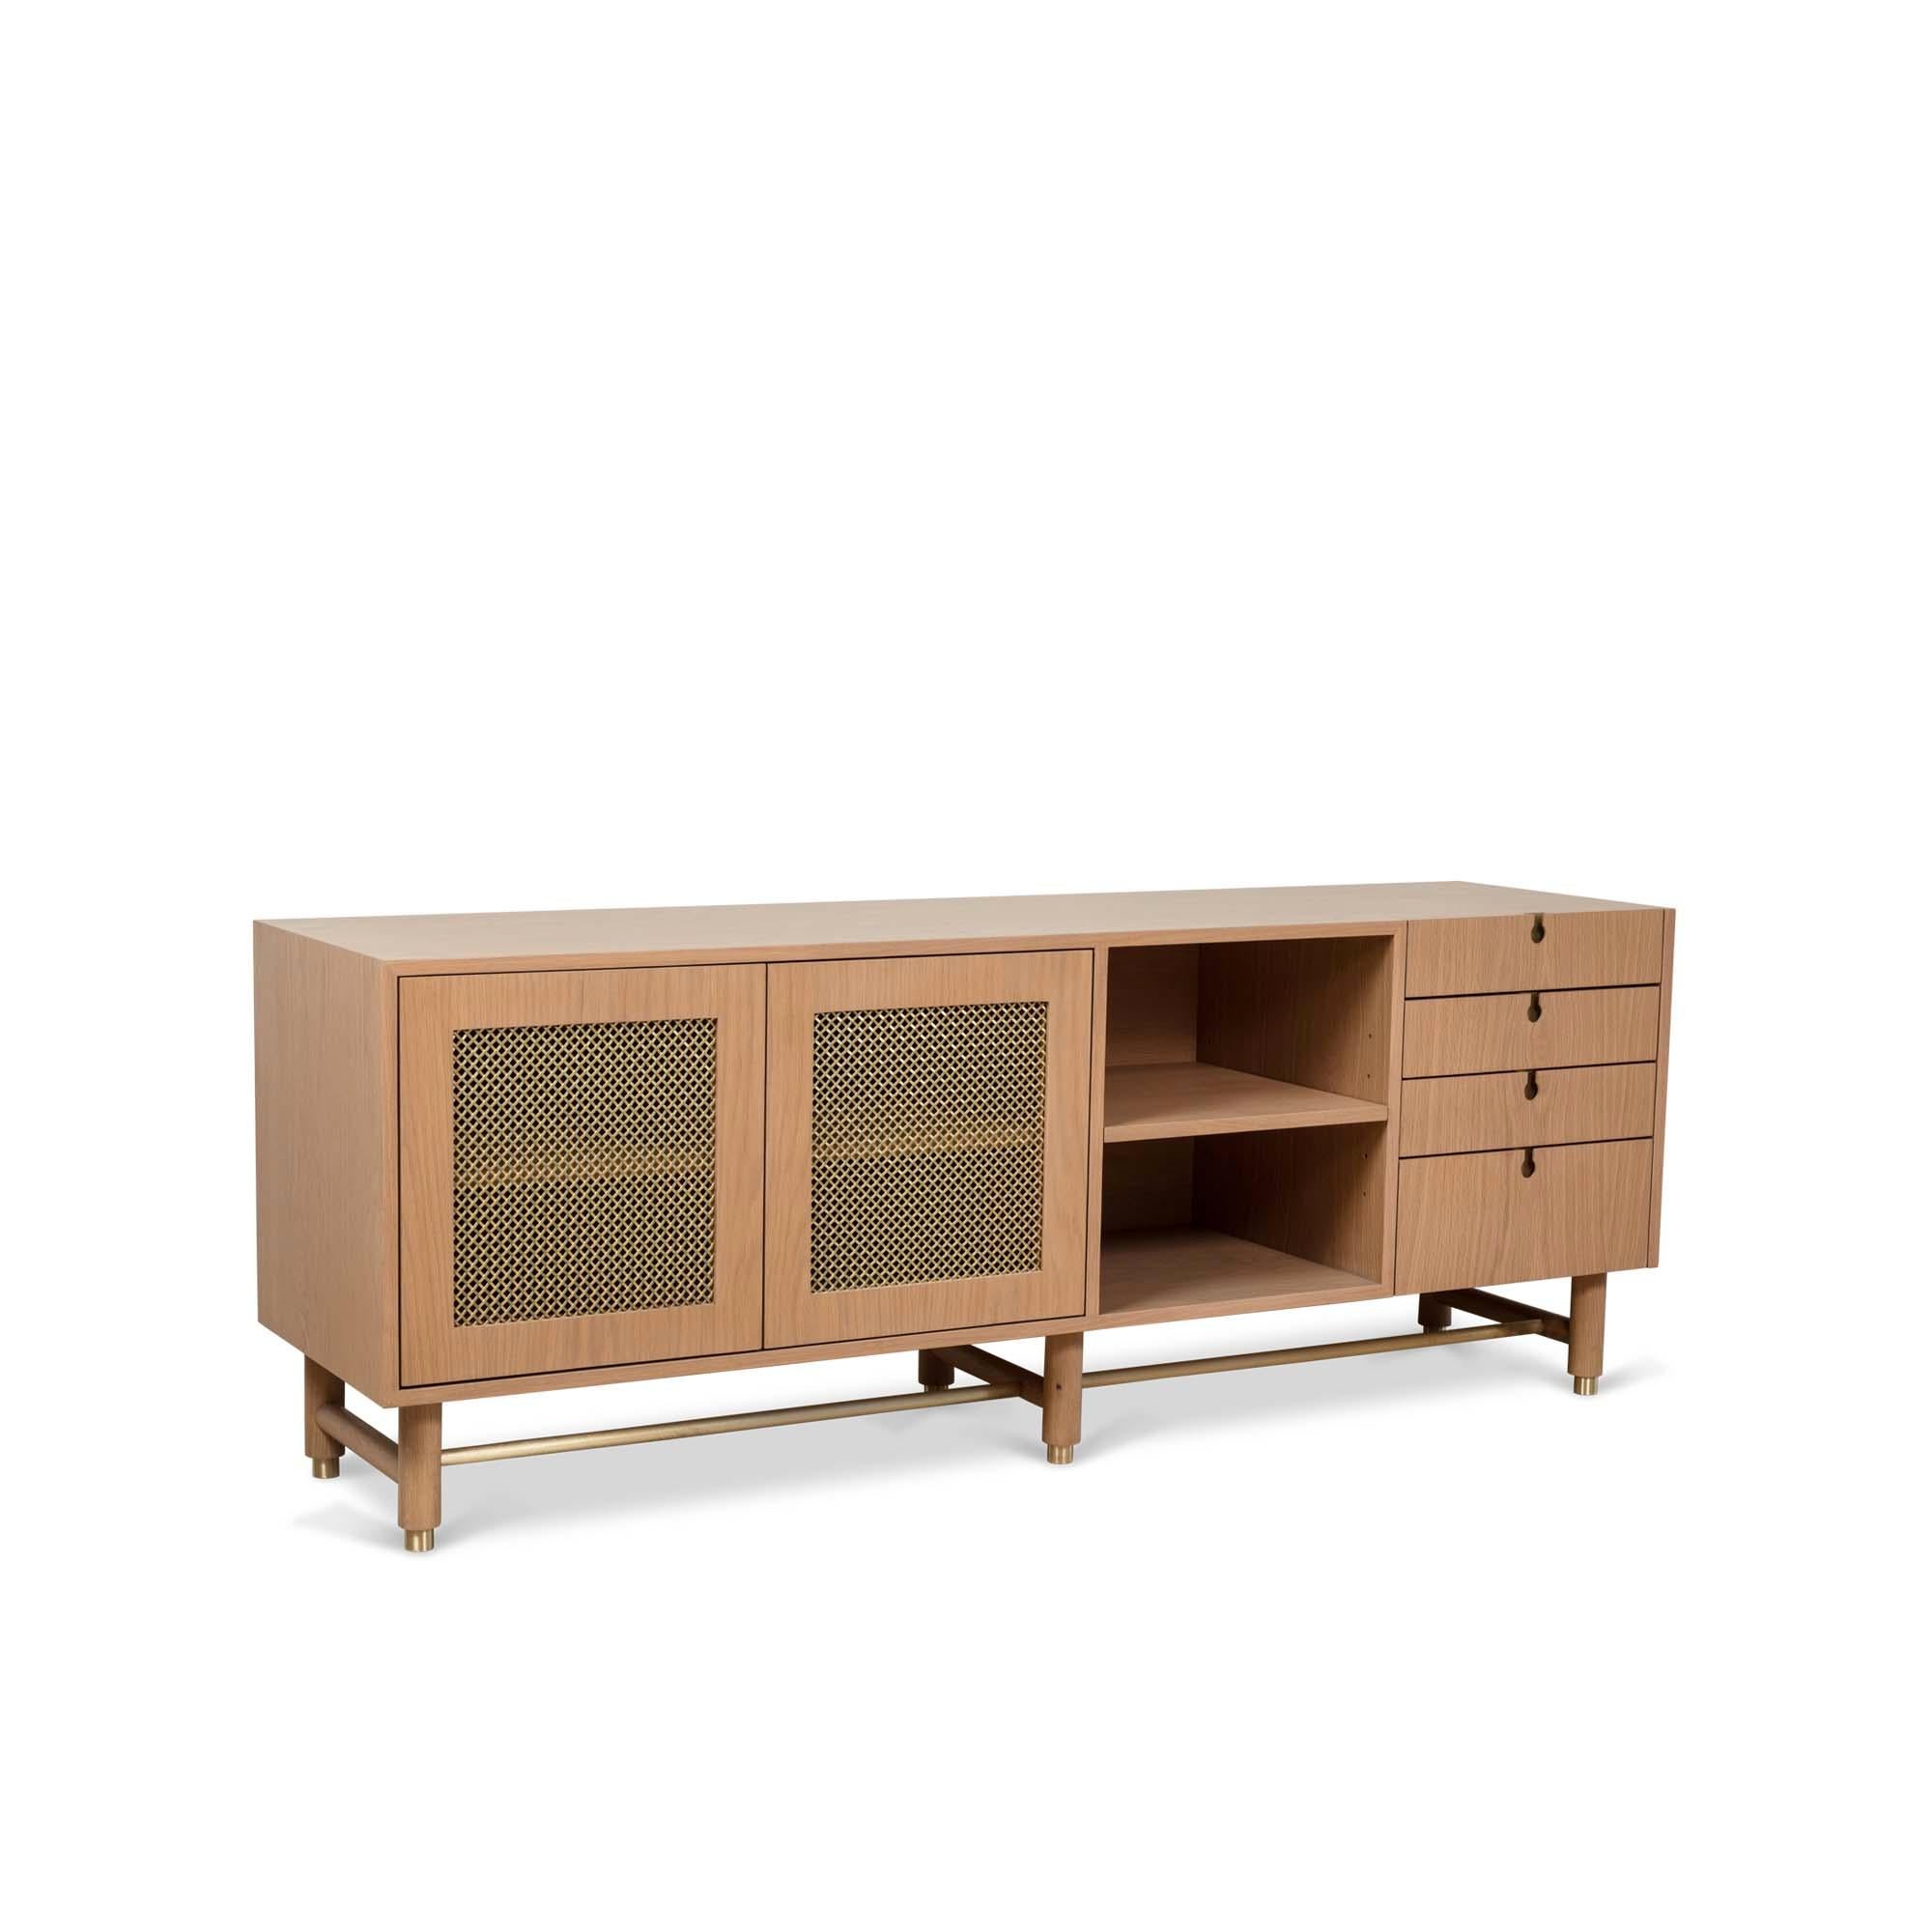 The Niguel Credenza features brass cap feet, a brass cross-stretcher bar and brass inlaid details with brass mesh sliding bypass doors. 

The Lawson-Fenning Collection is designed and handmade in Los Angeles, California.
 